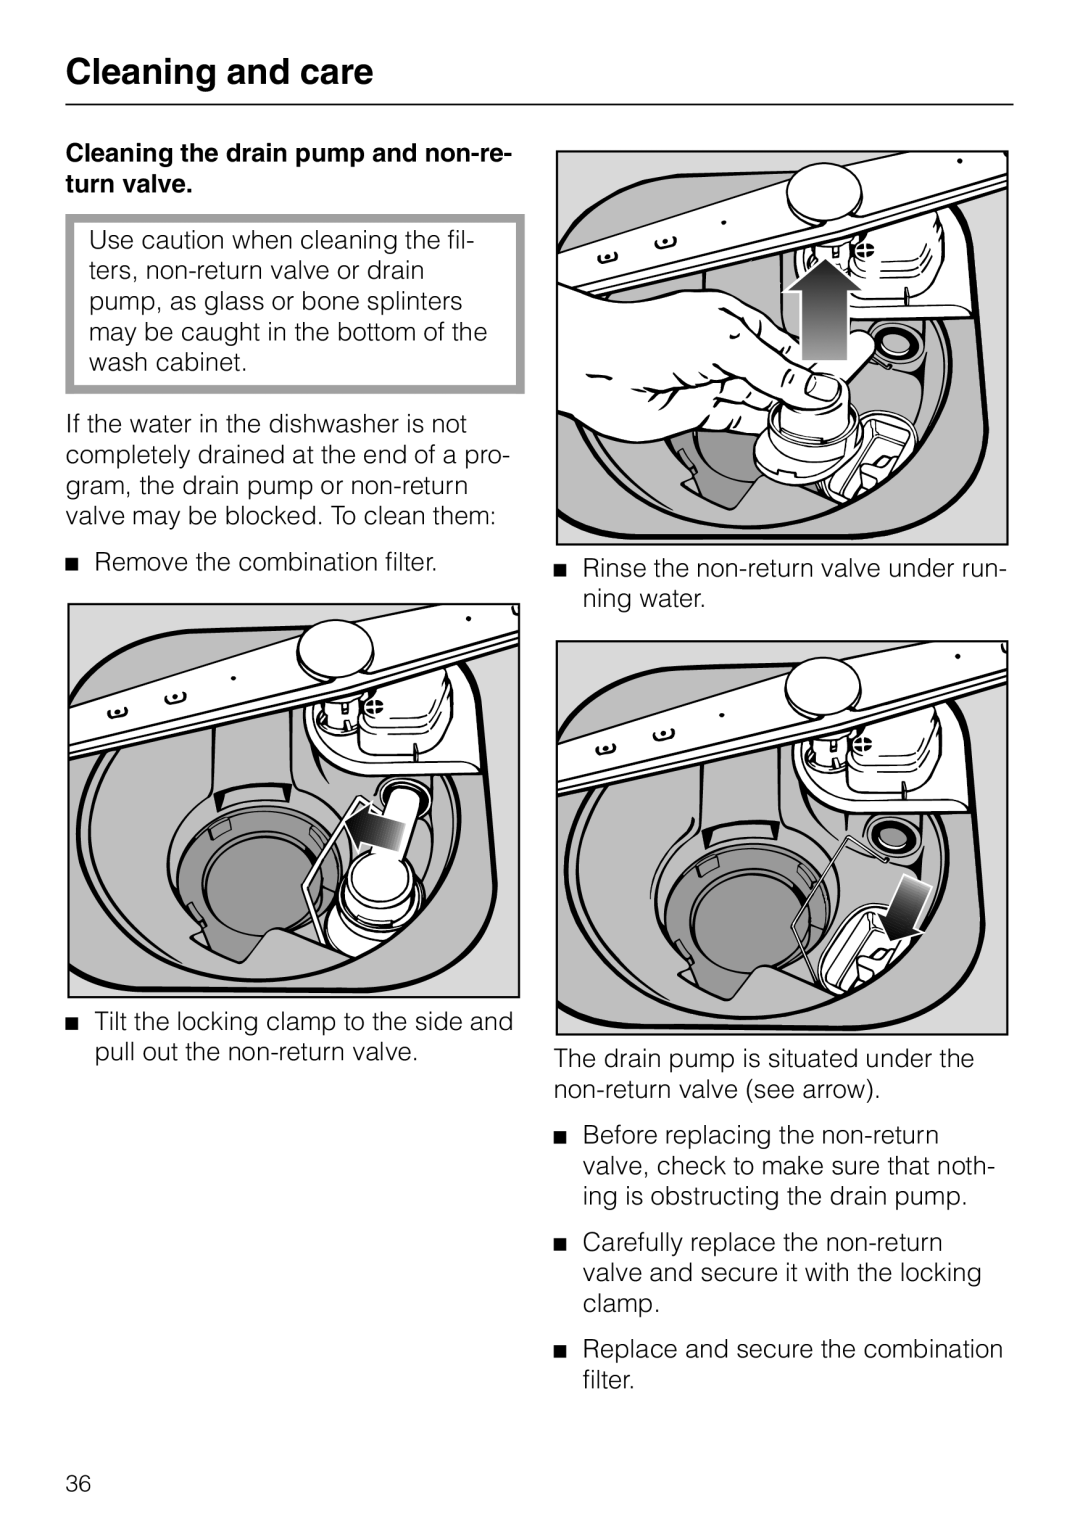 Miele M.-NR. 04 390 922 operating instructions Cleaning and care, Cleaning the drain pump and non-re-turn valve 